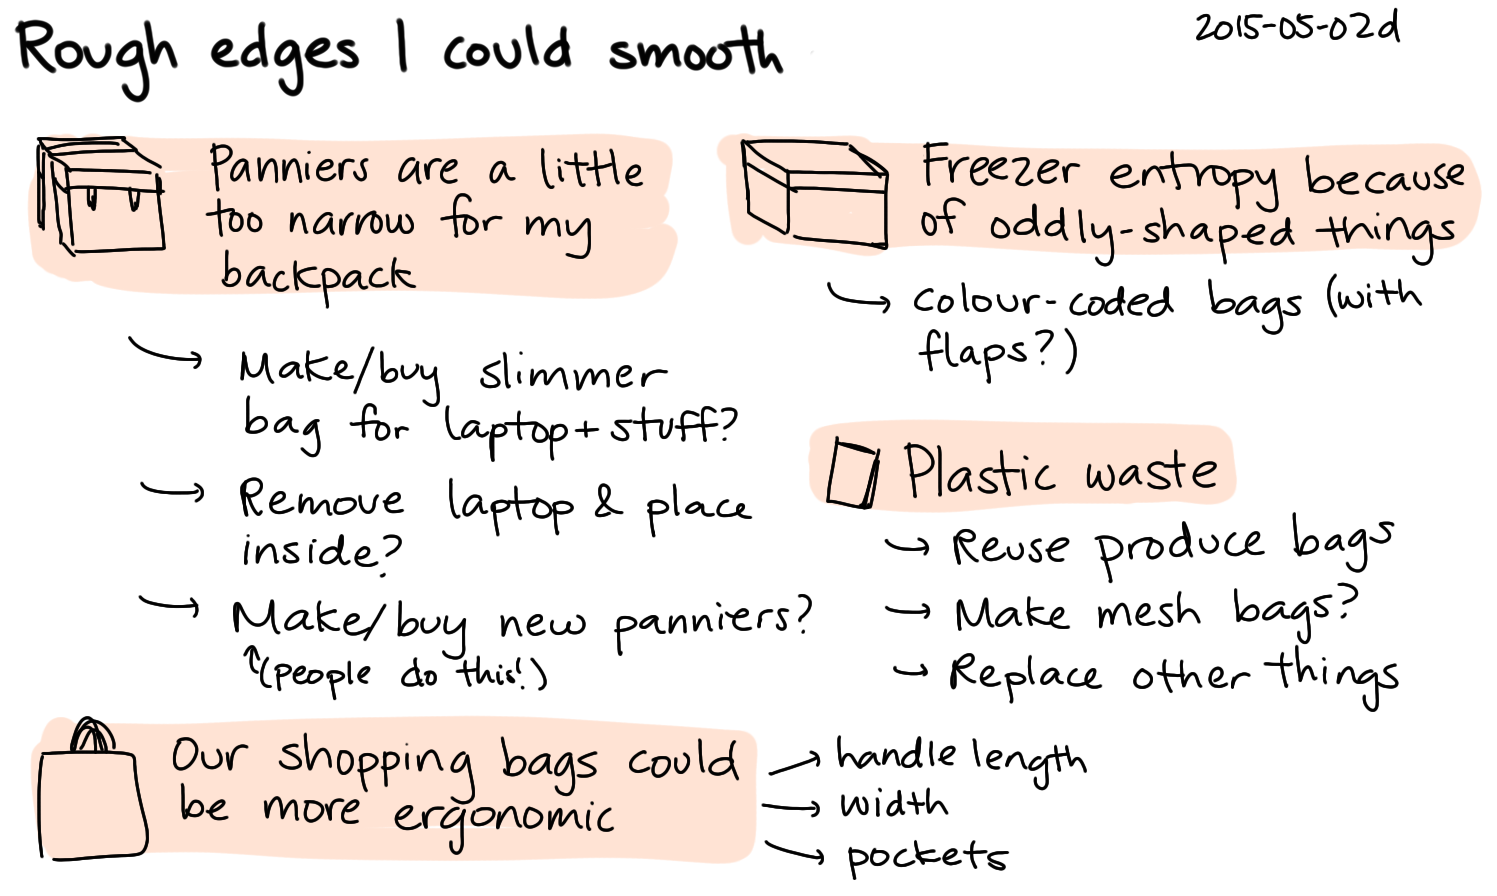 2015-05-02d Rough edges I could smooth -- index card #sewing.png